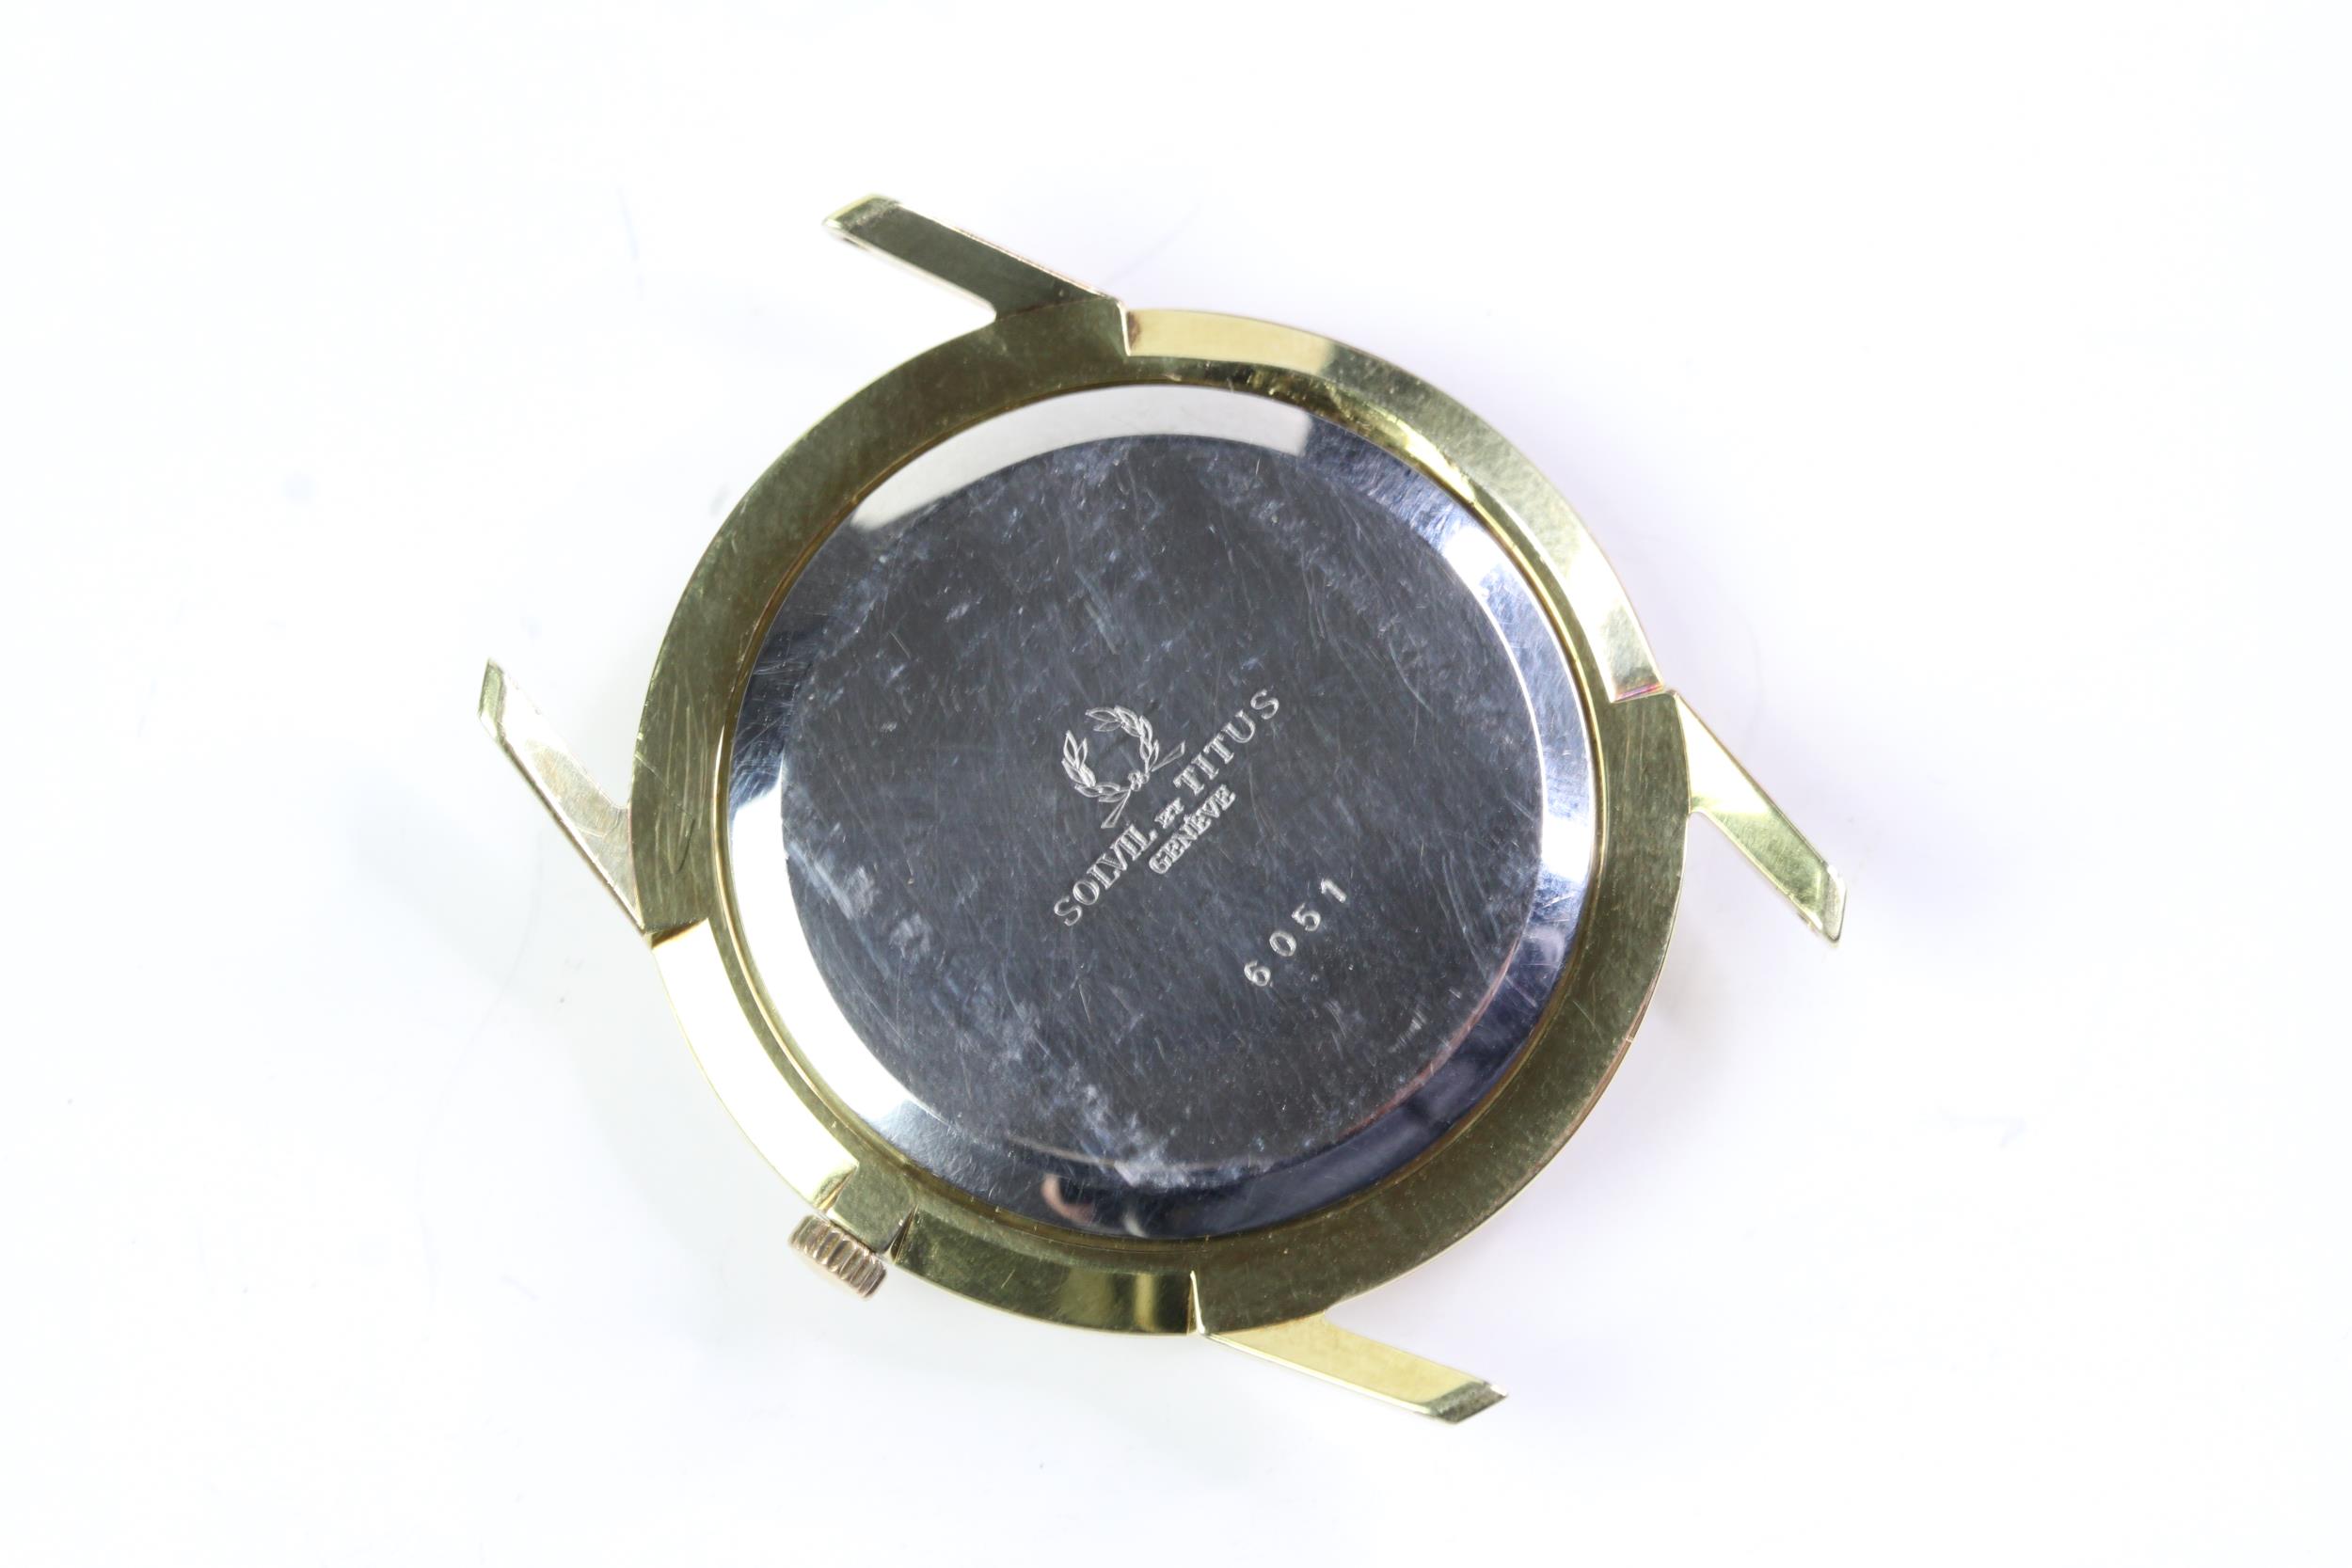 1960s Titus watch with grained dial, Gold plated stainless steel case 31mm with snap on case back, - Image 2 of 2